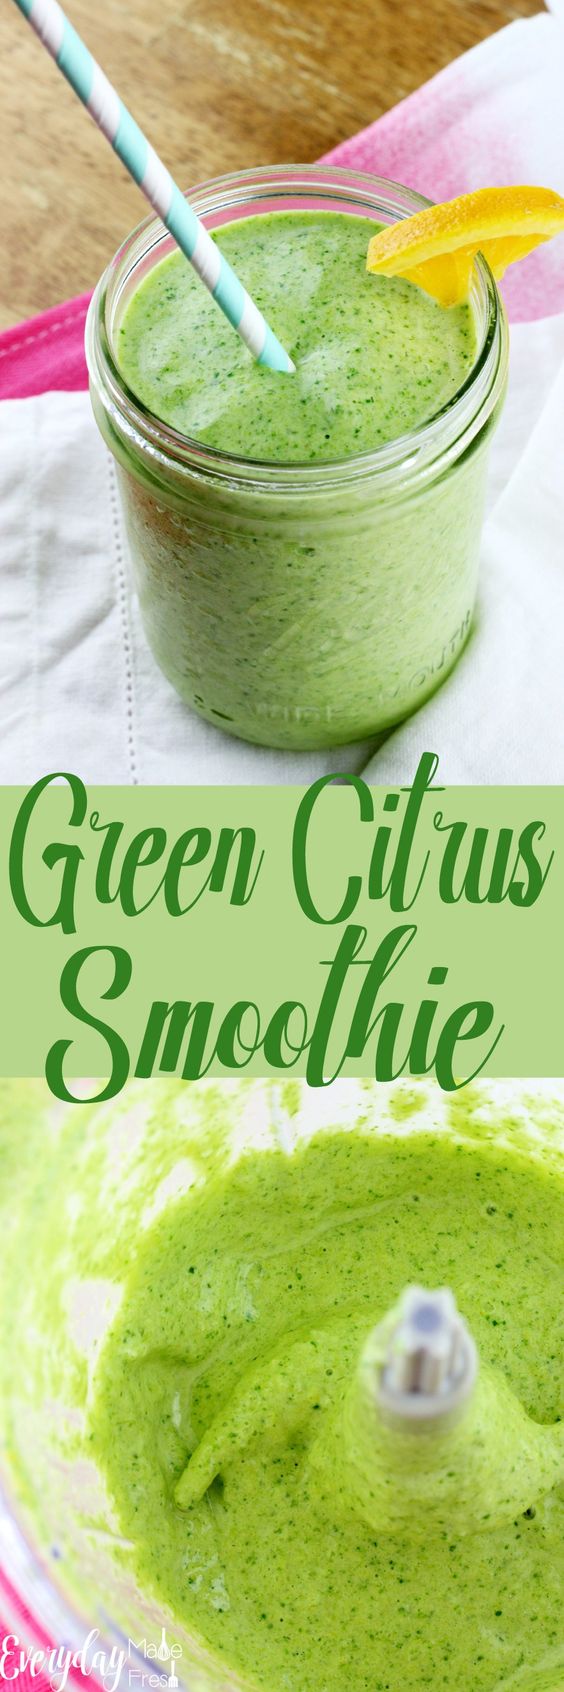 Read more about uncommon green smoothie benefits in this eye opening article. | simple green smoothies | fruit smoothies for beginners | sugar free smoothie recipes | healthiest green smoothie #healthy #healthyliving #healthyeating #keepingfit #fitnessgoals #mealprep #nutrition #health #wellness